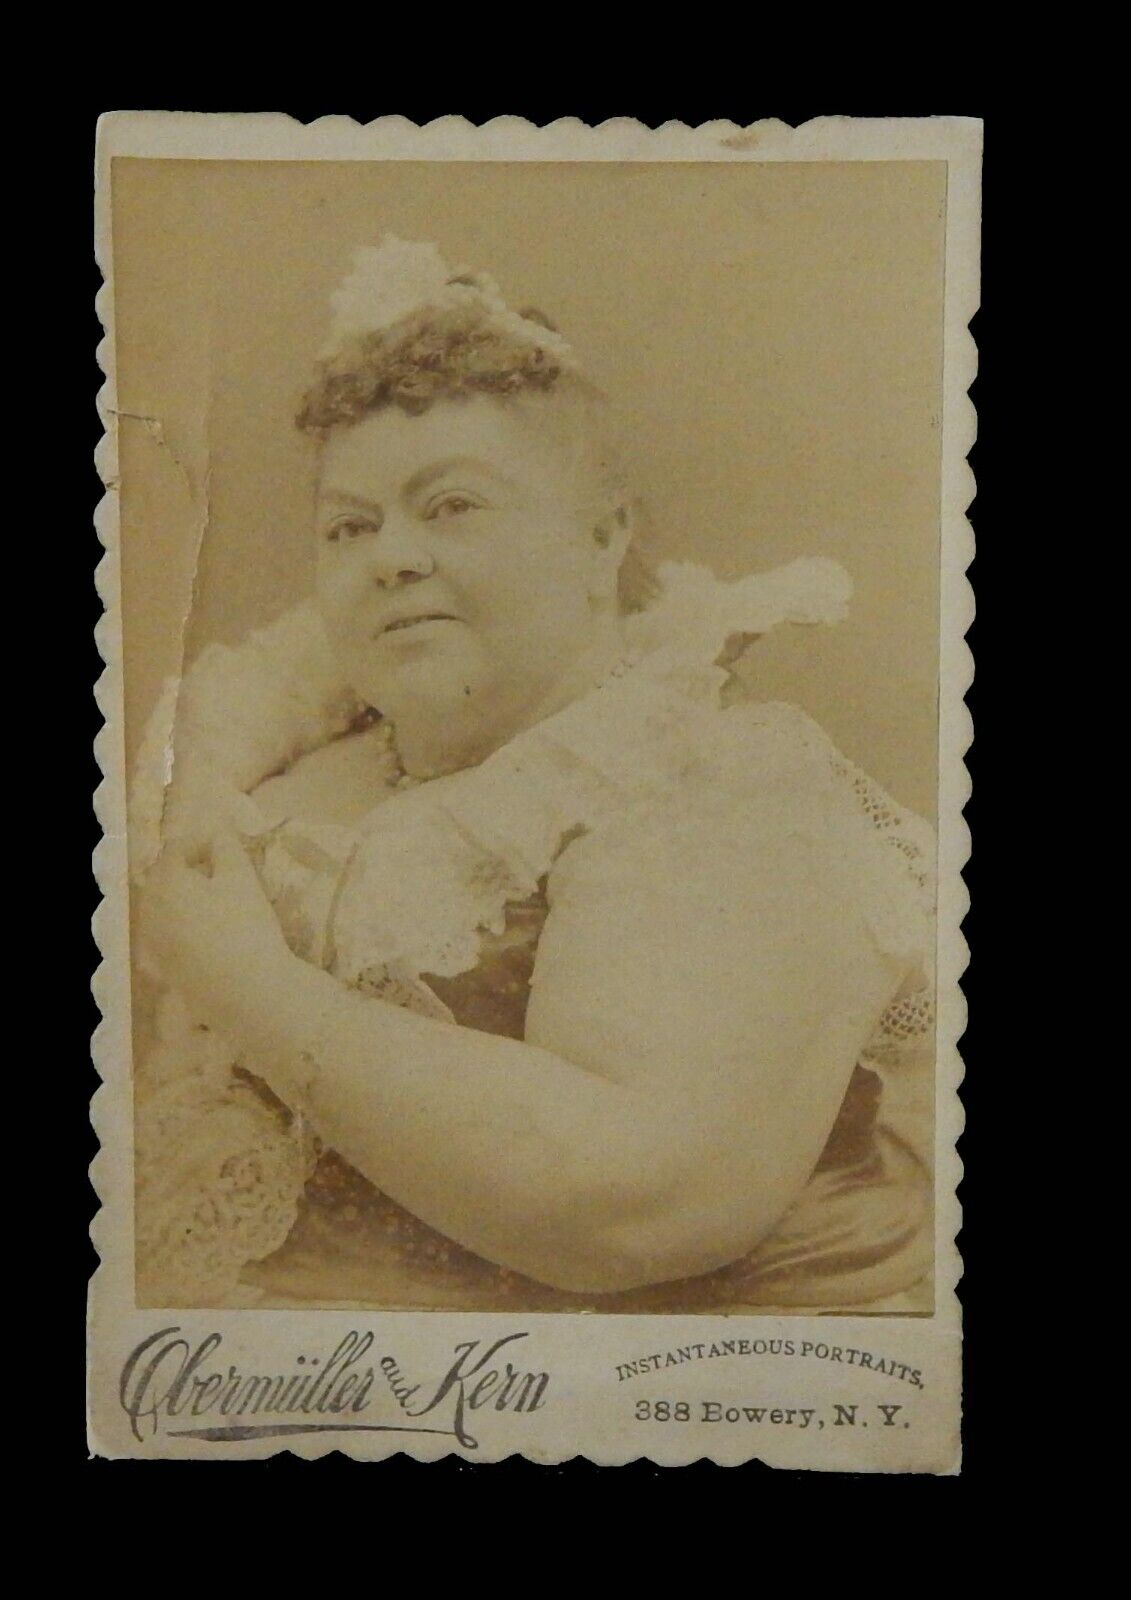 CABINET CARD PHOTO FAT LADY CIRCUS PERFORMER by OBERMULLER & KERN NEW YORK